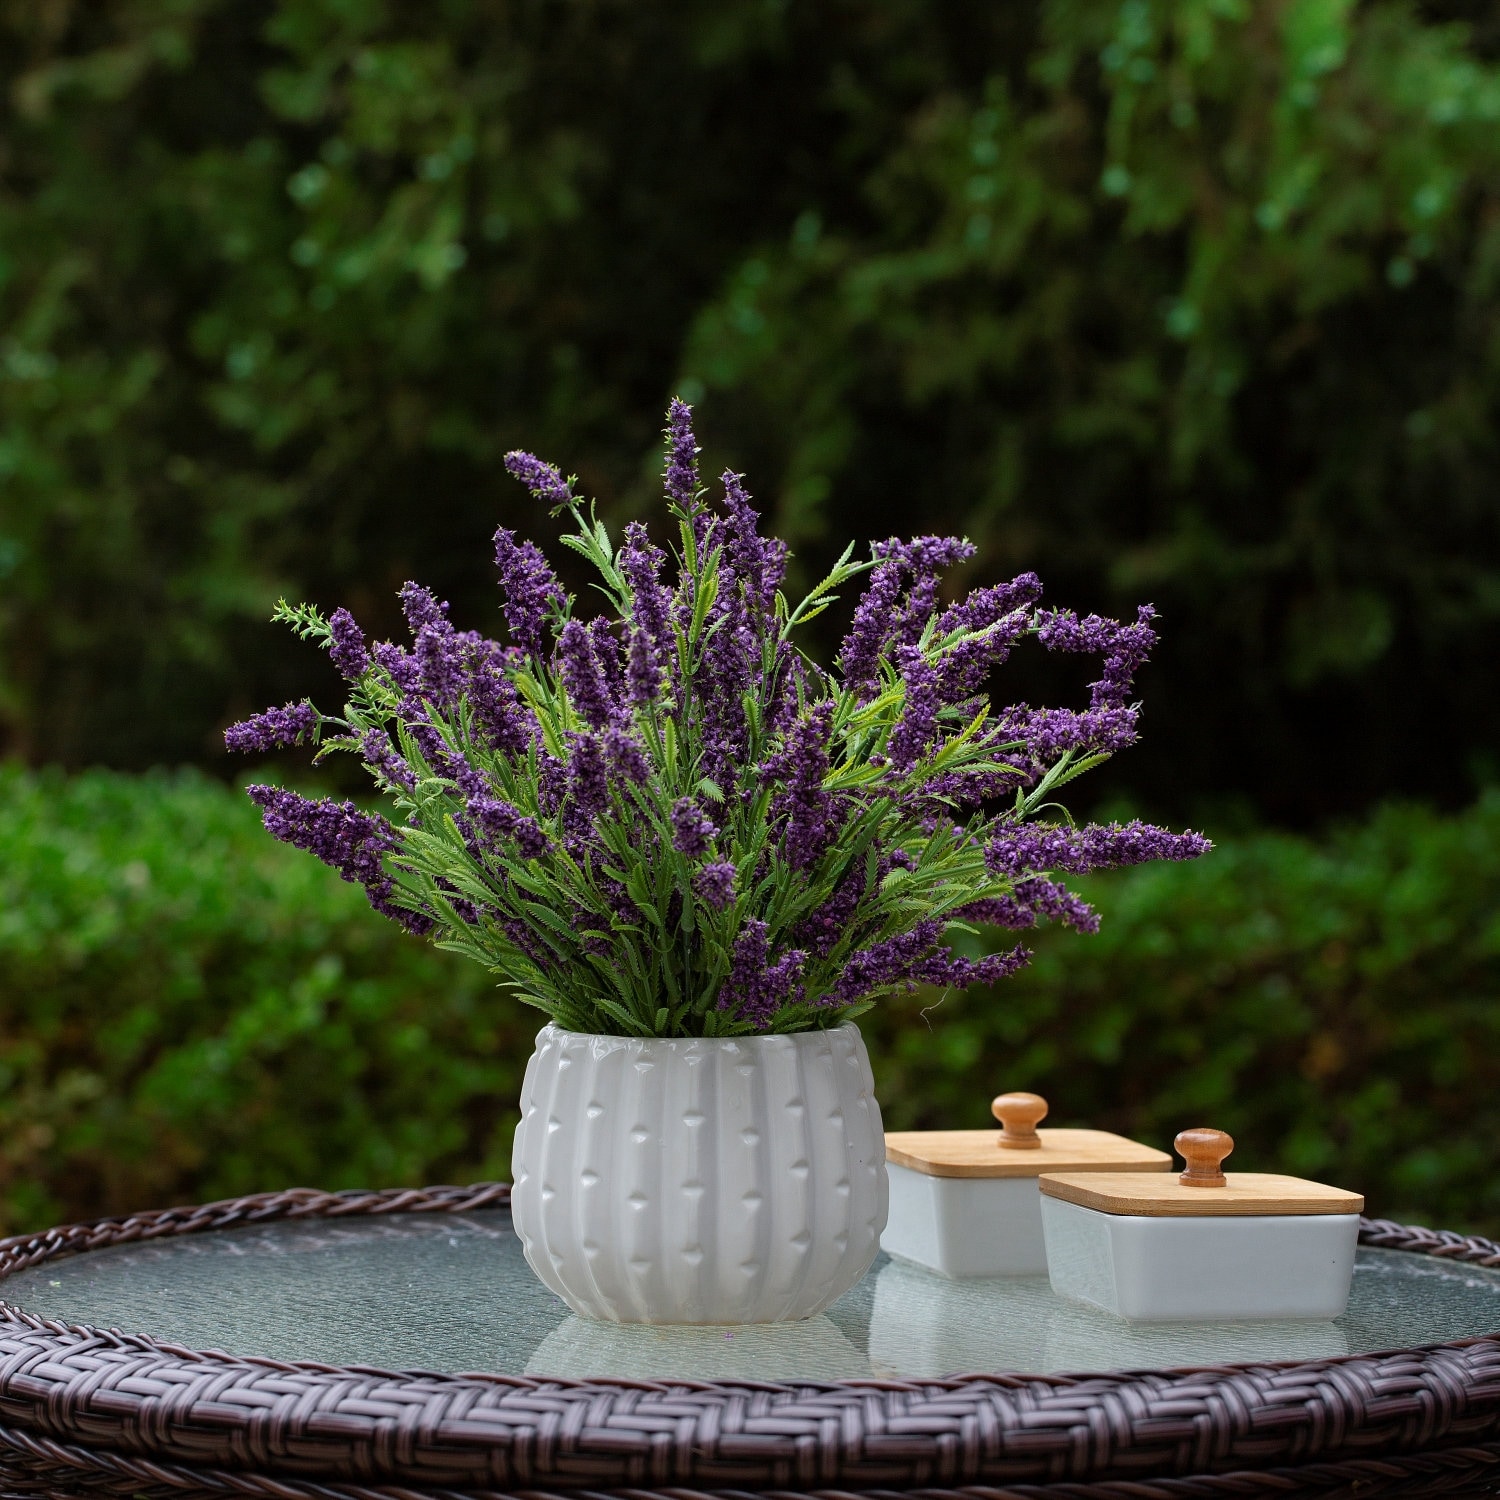 Sruiluo Artificial Plants Lavender Plants Outdoor Flocked Fake Lavender in  Recycled Wooden Pot Artificial Lavender Faux Flowers for Home Kitchen